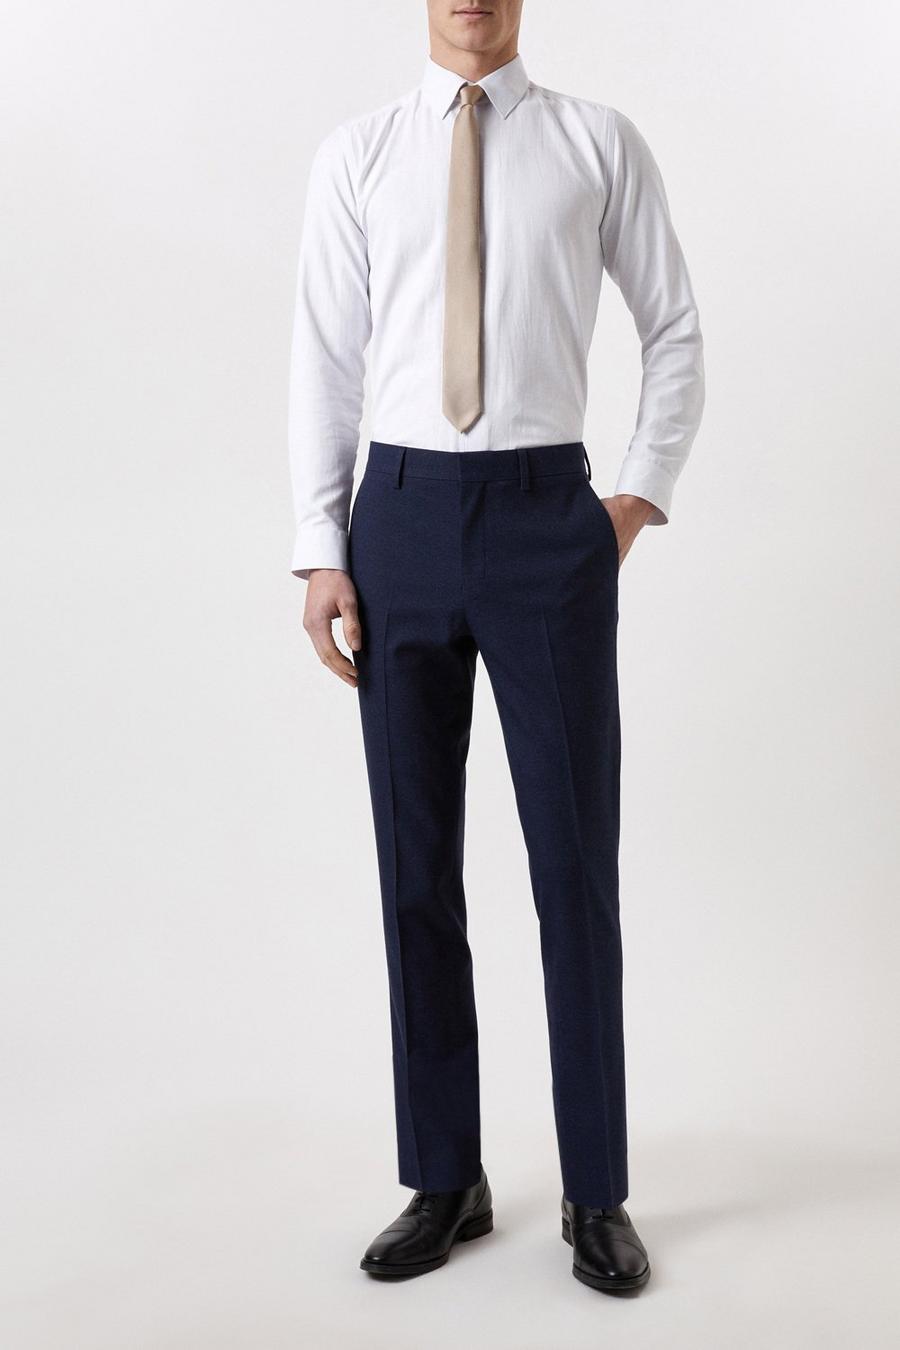 Plus And Tall Slim Fit Navy Marl Suit Trousers